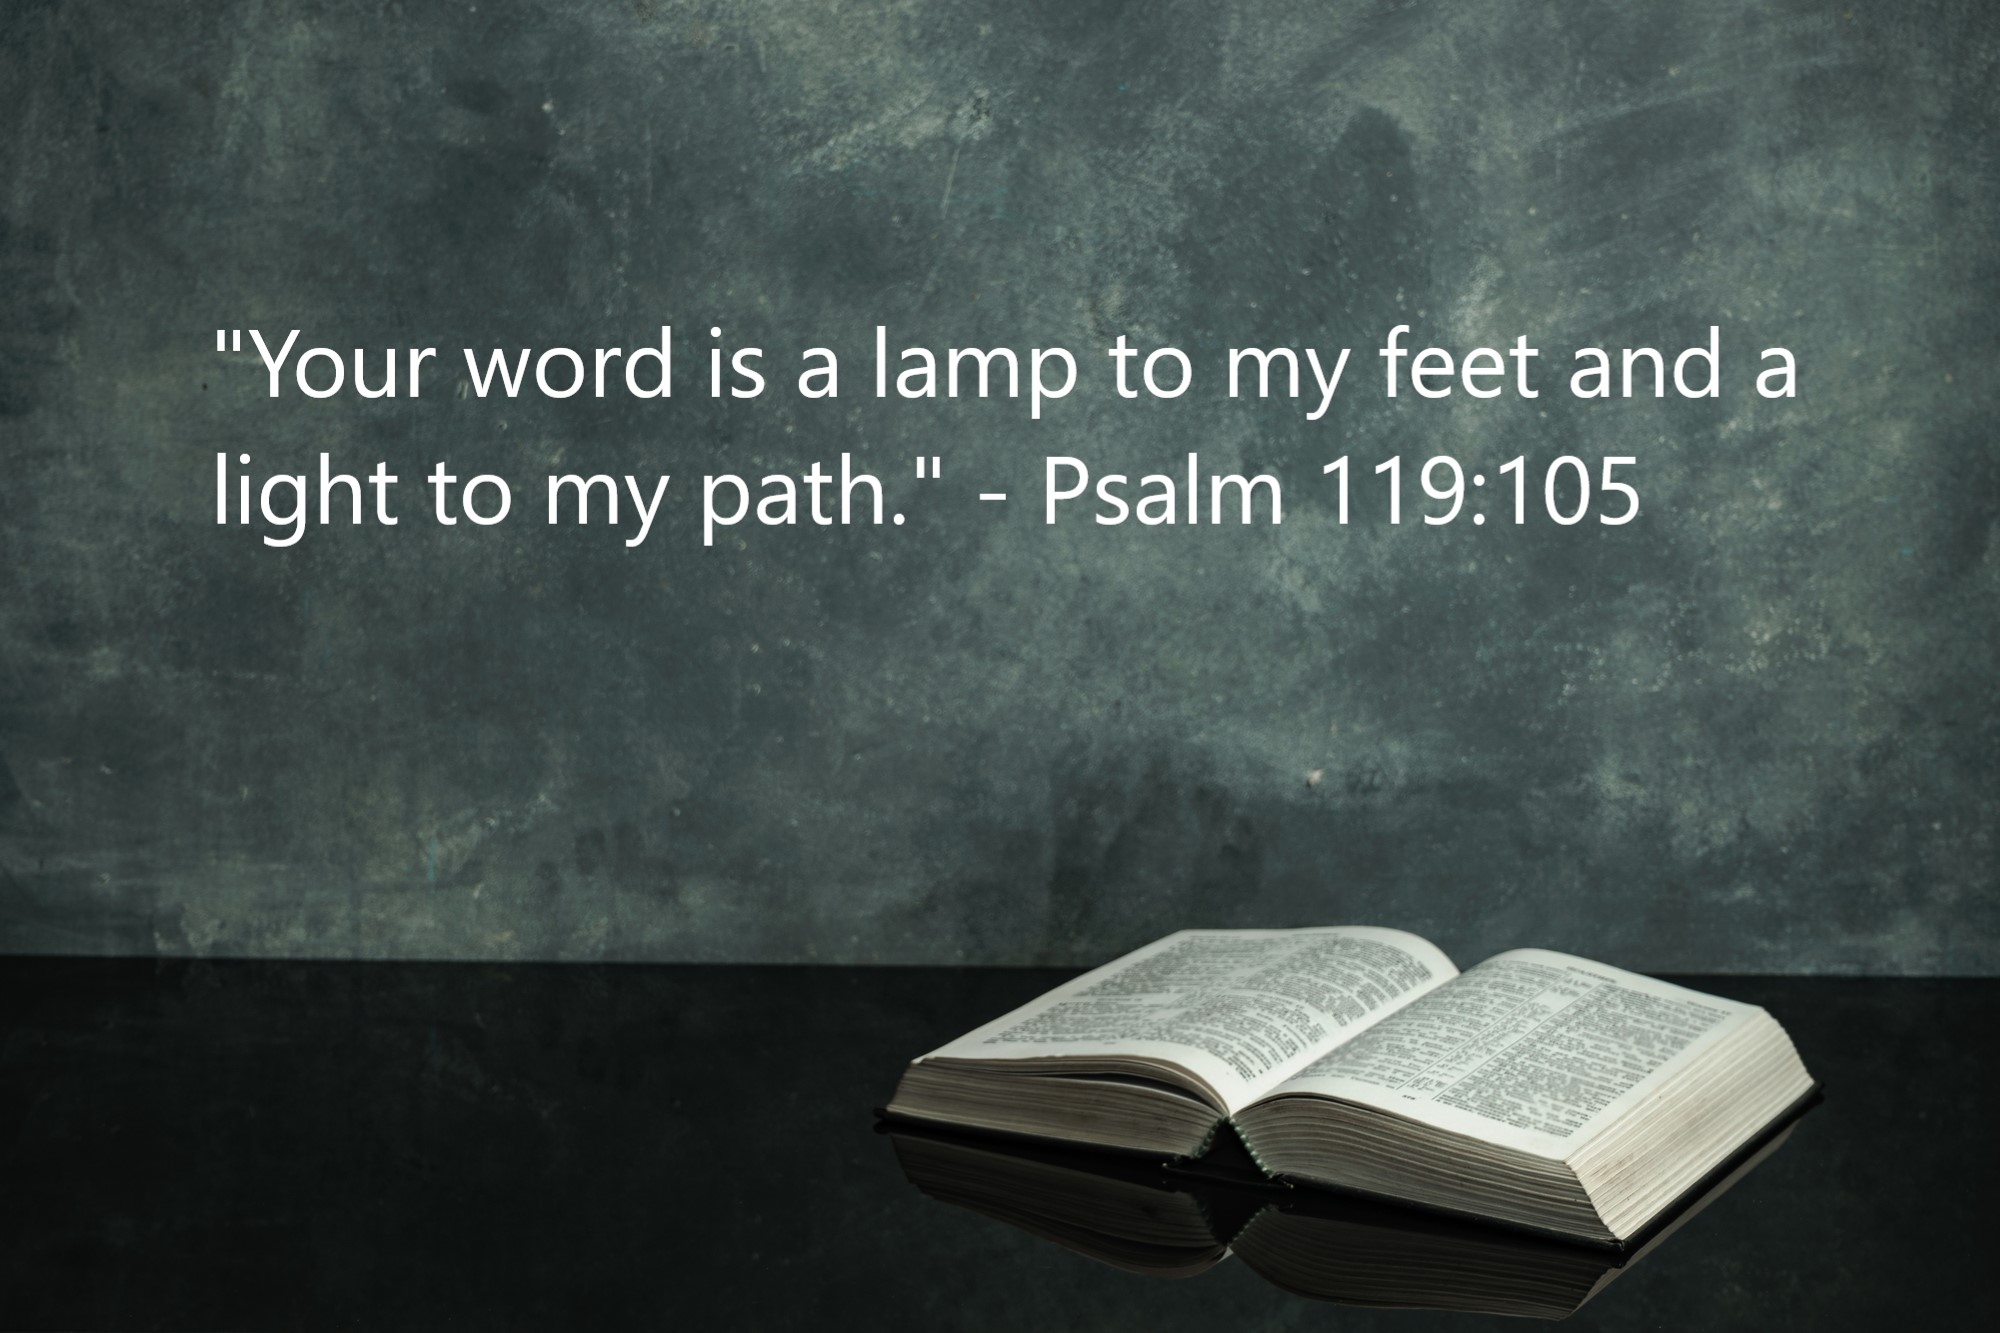 "Your word is a lamp to my feet and a light to my path." - Psalm 119:105